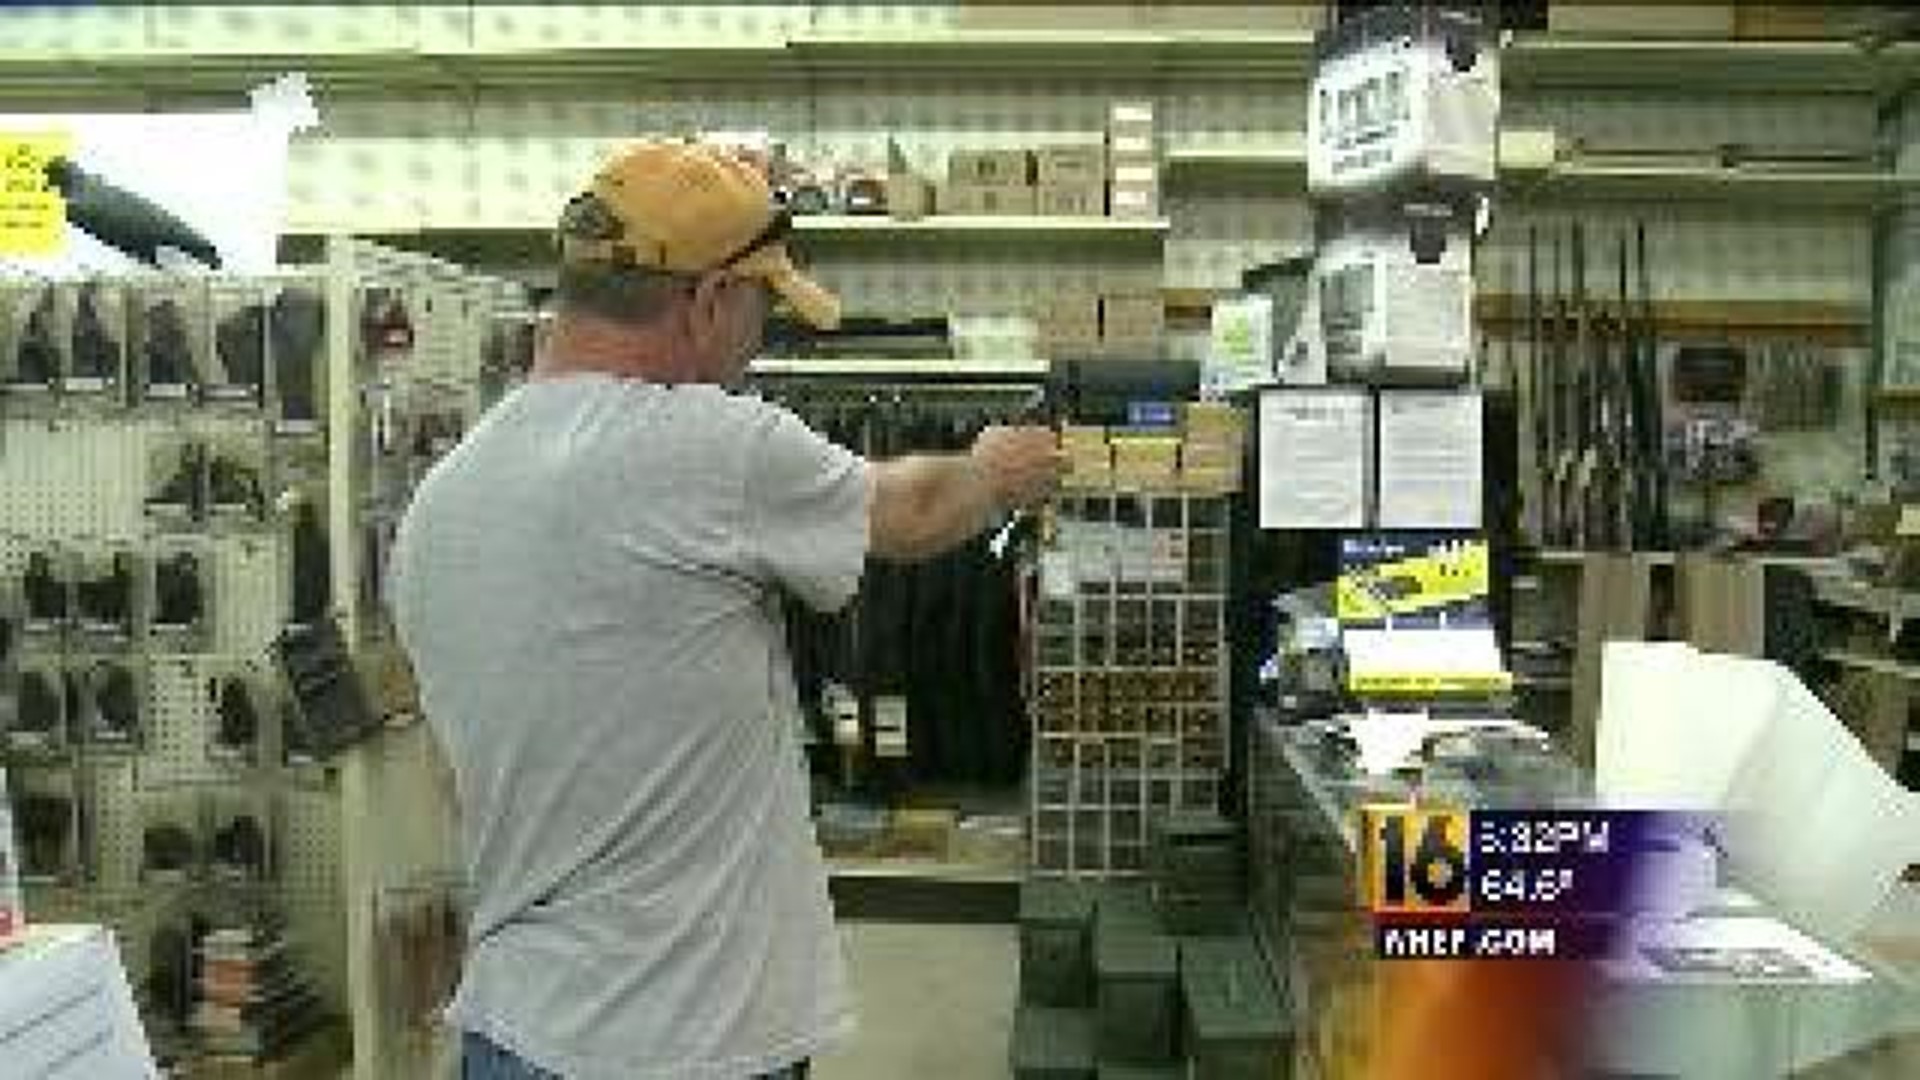 Gun Owners React To Background Check Proposal